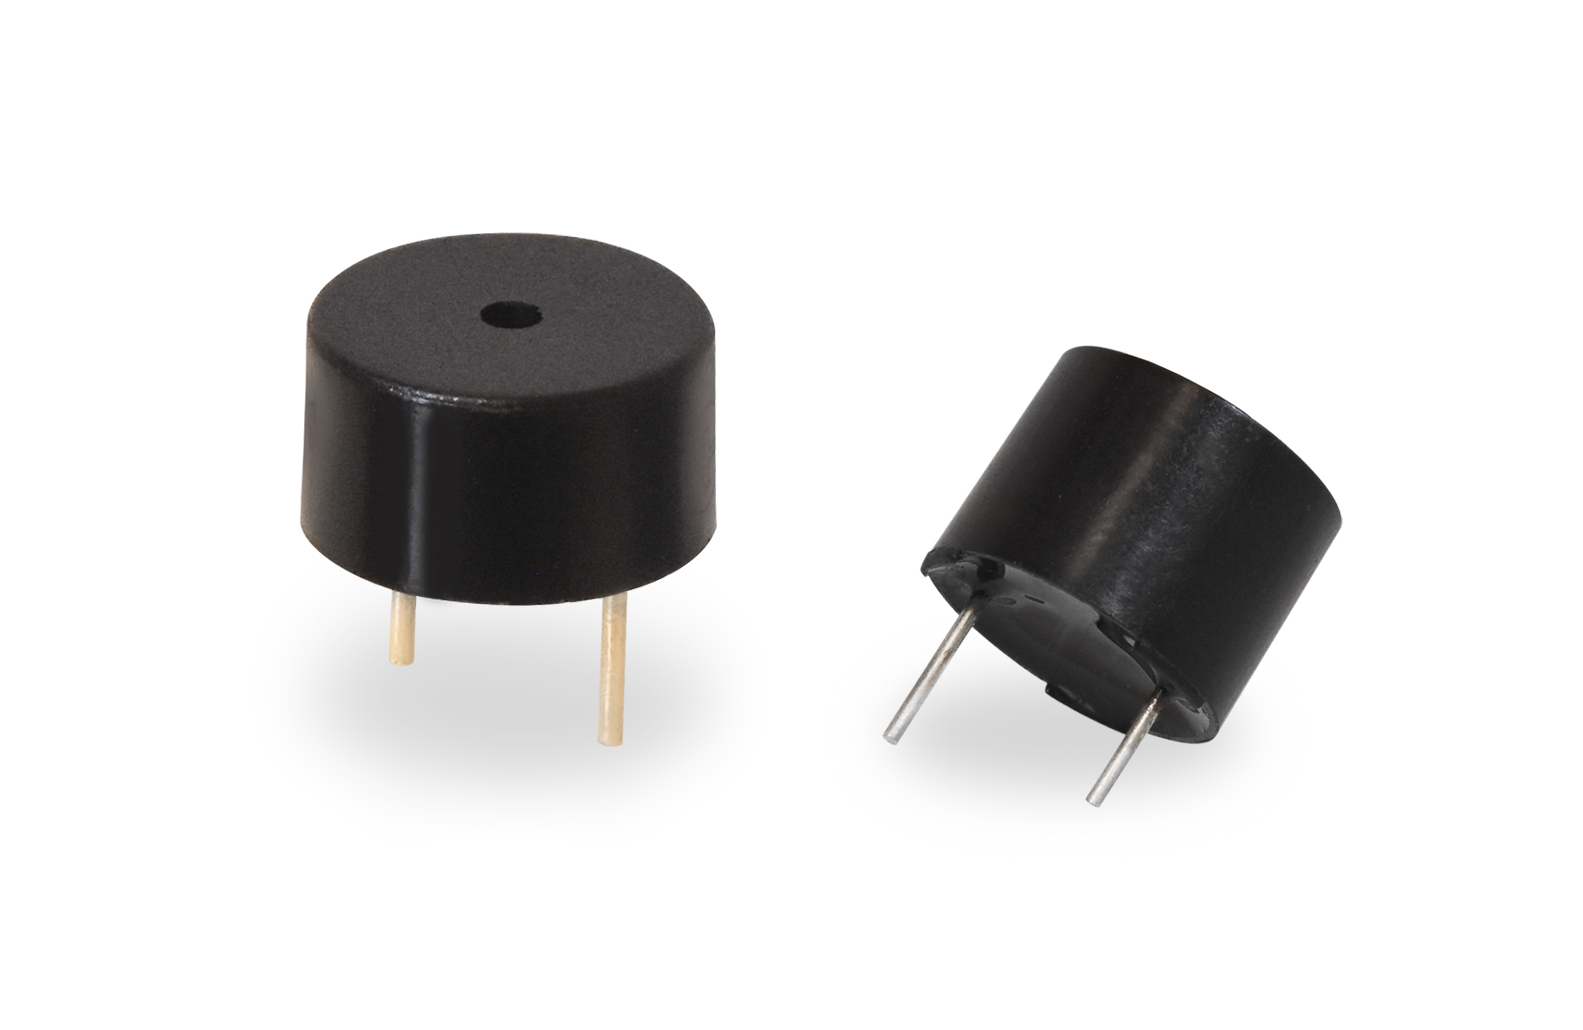 Indicator Buzzers Feature Tight Frequency Tolerances